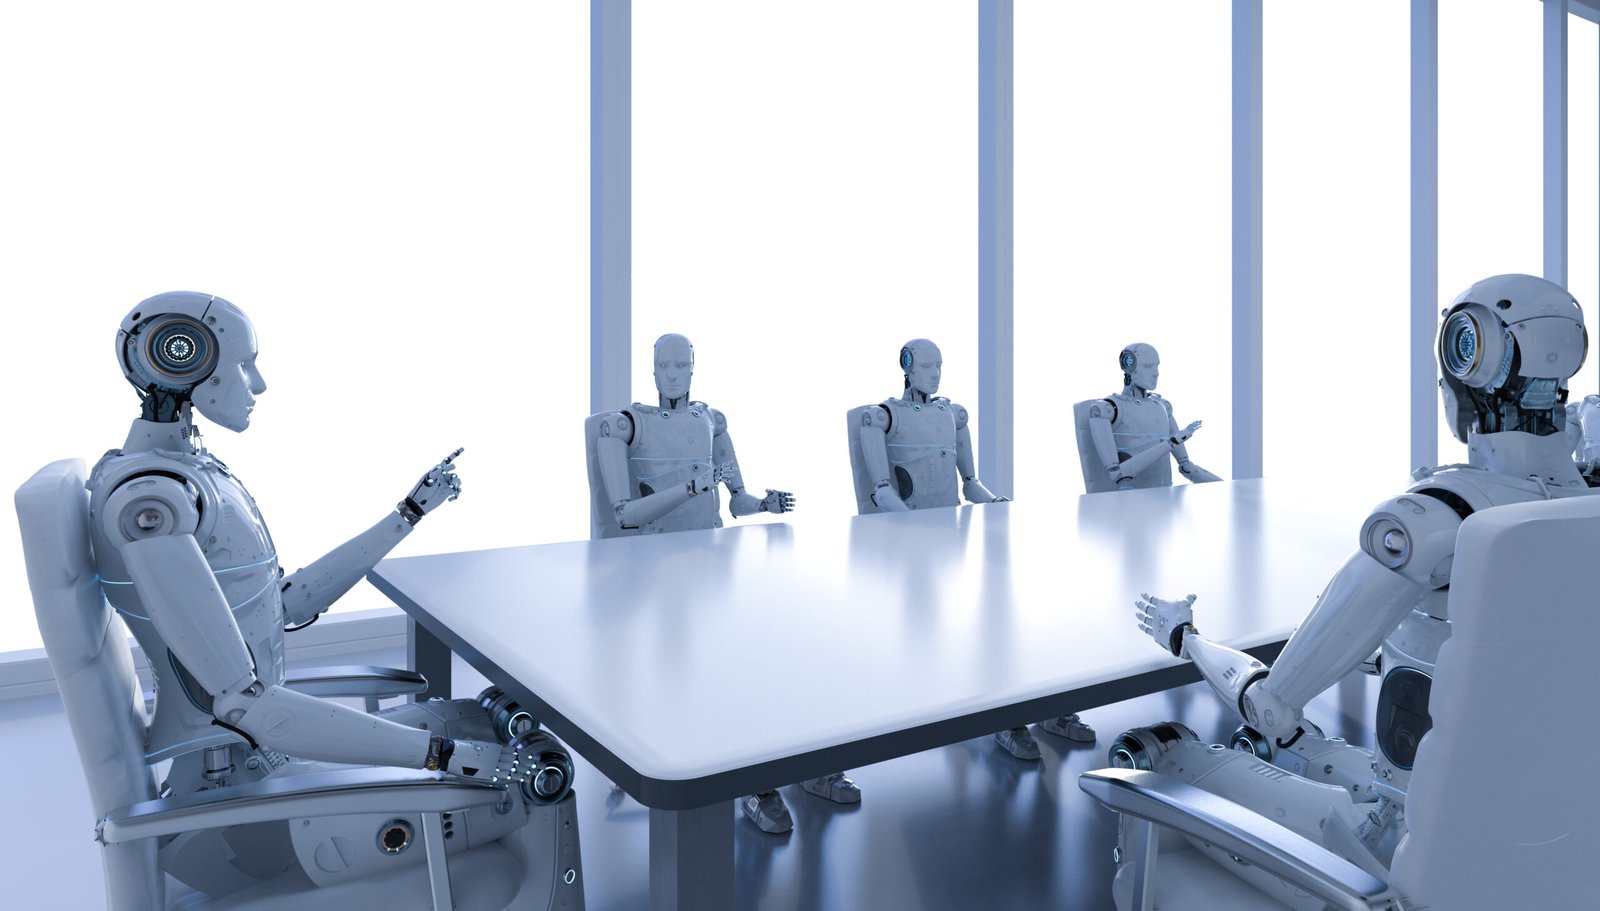 Robots as Co-workers: Exploring Human-Robot Collaboration